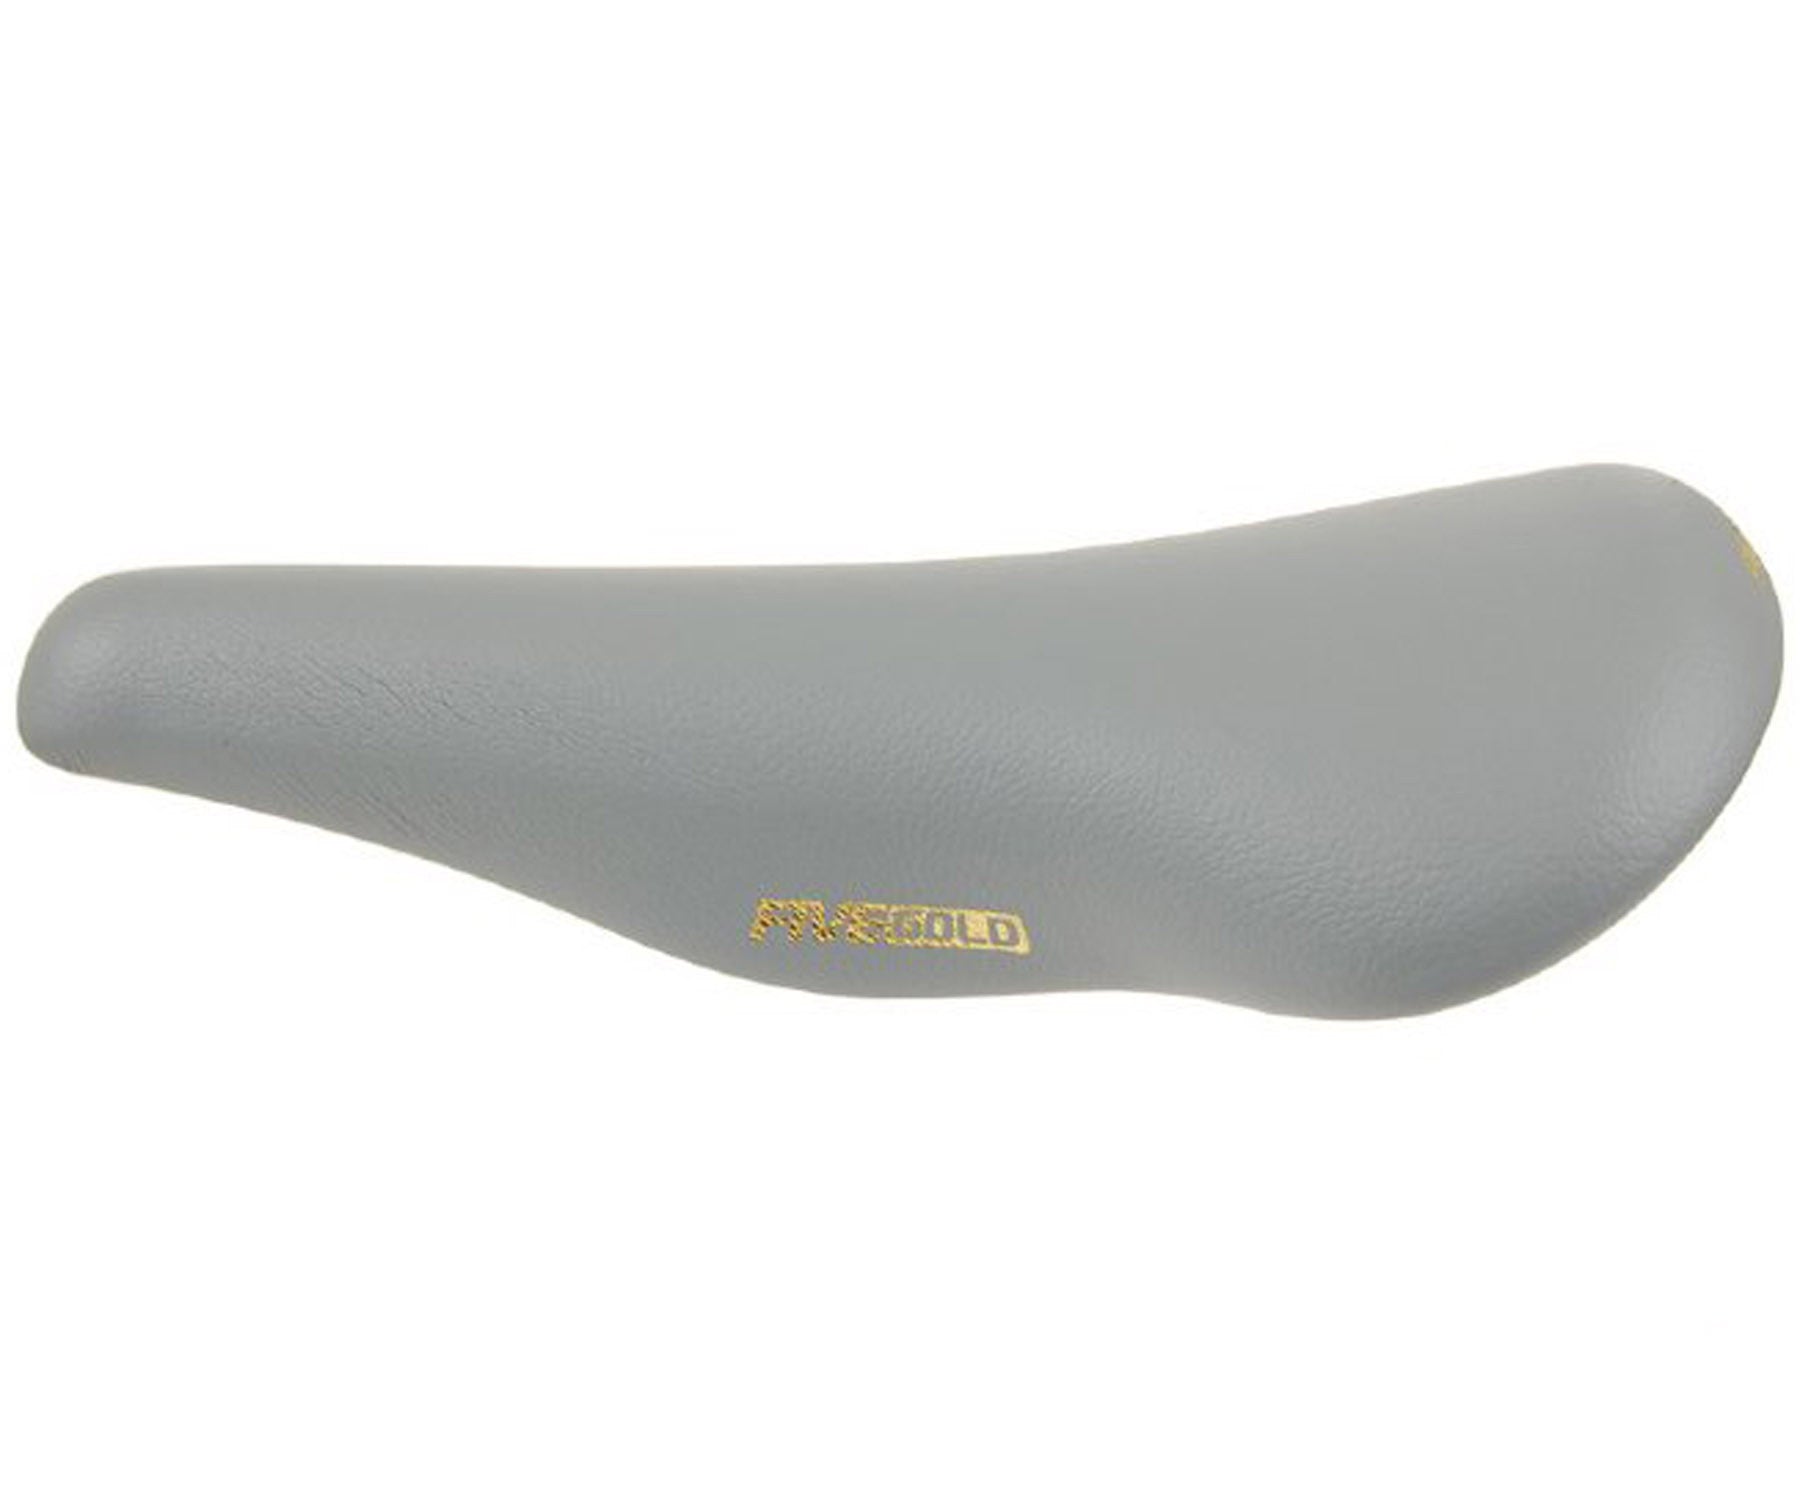 Kashimax Five Gold 4P saddle - smooth cover